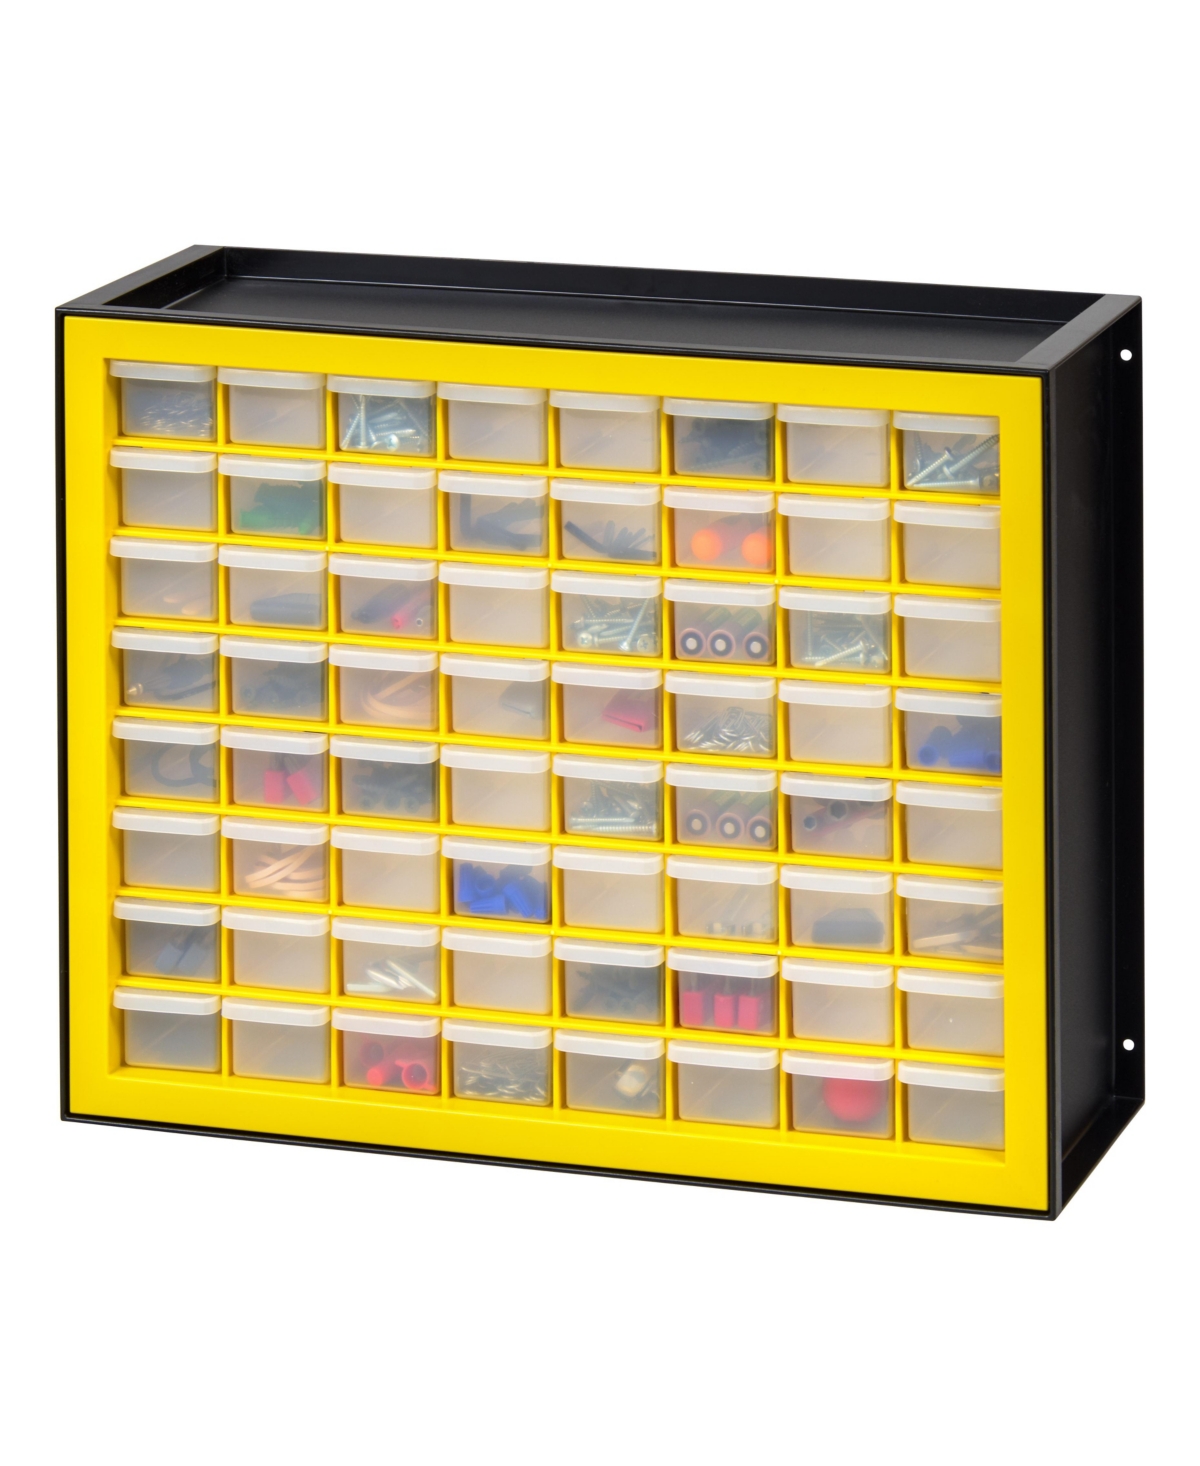 Screw Organizer, Hardware Storage Organizer, 64 Drawer Parts Cabinet, Plastic Drawer Storage for Hardware Crafts, Small Parts, Nuts and Bolts